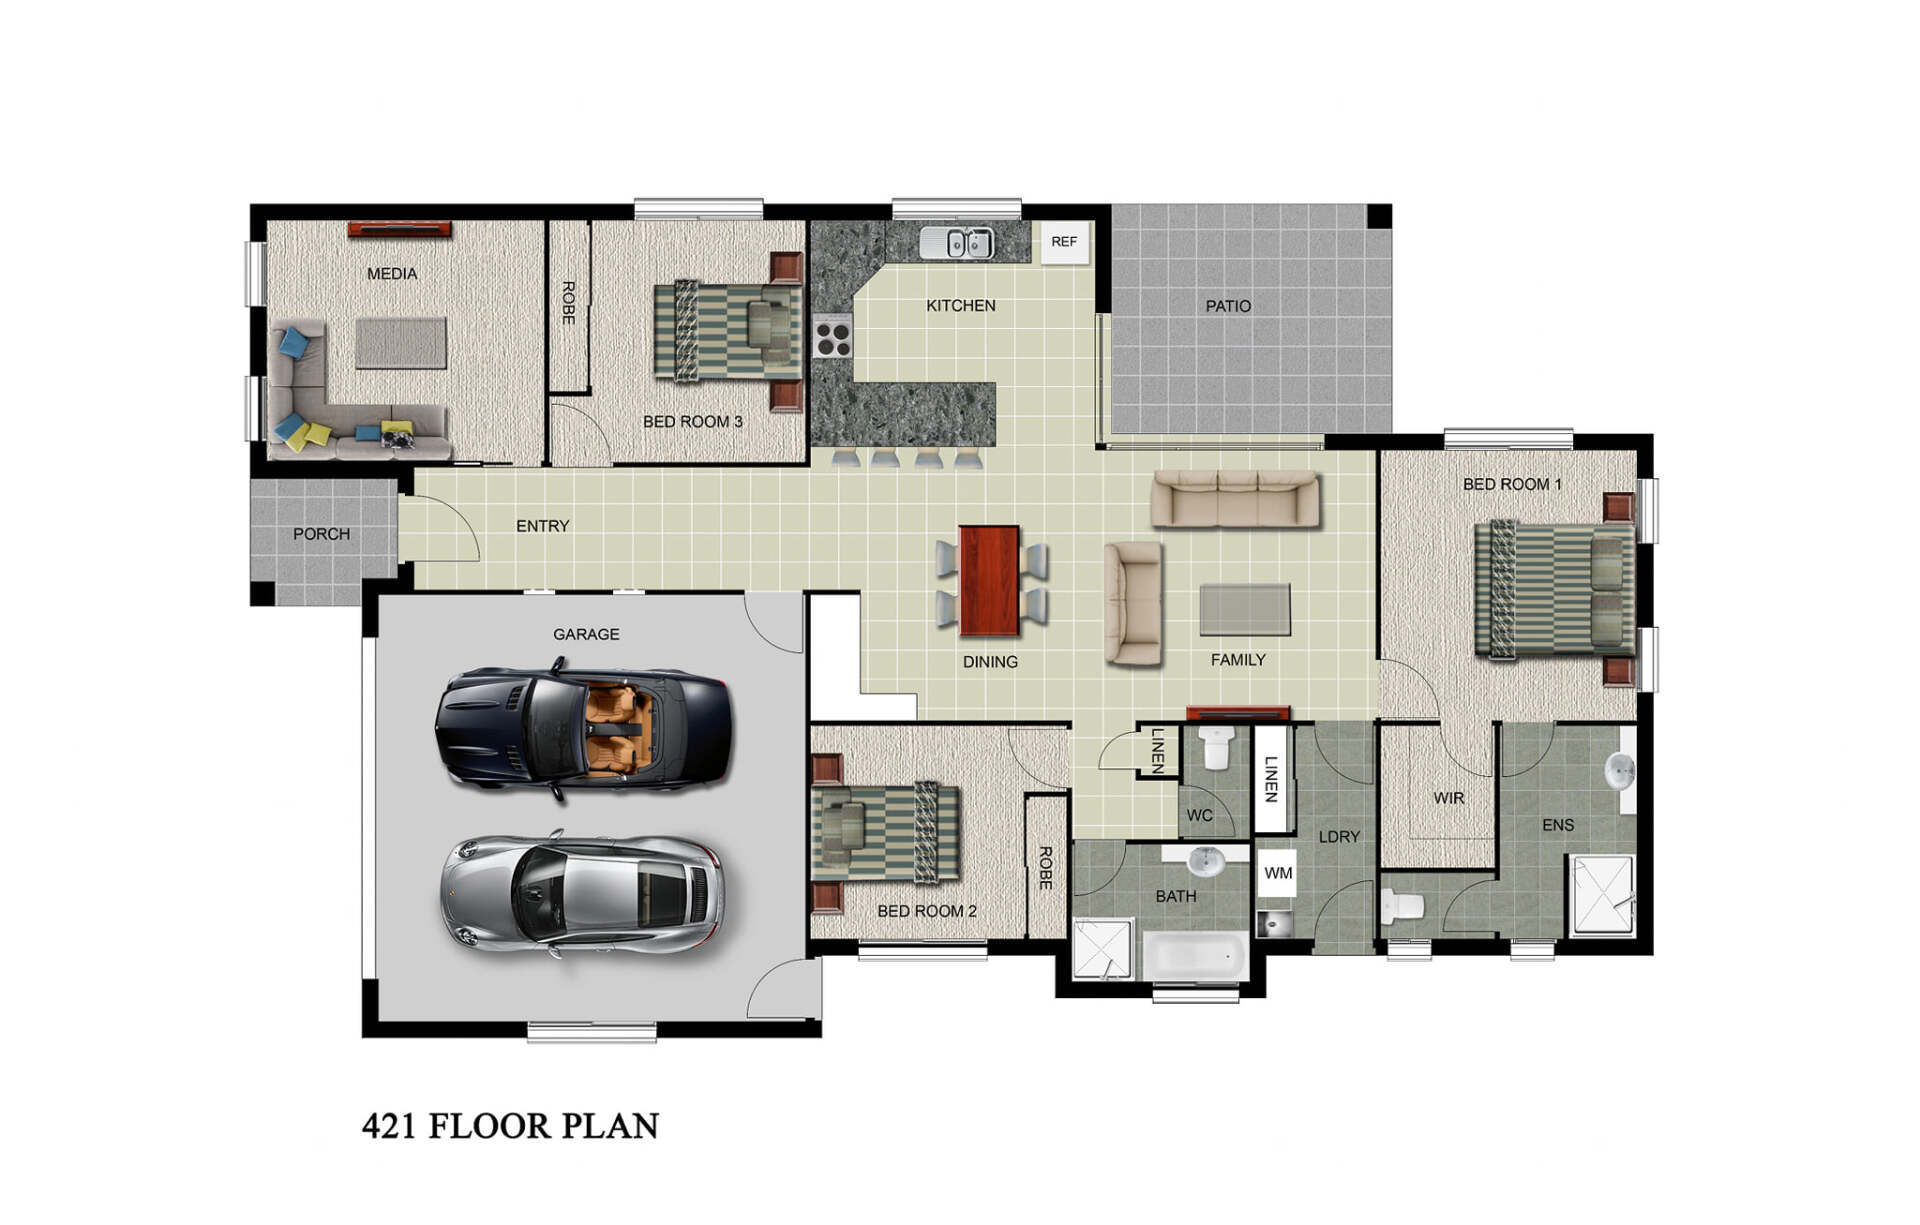 421 Floor Plan — Country to Coast Homes in Logging Creek Rd, QLD